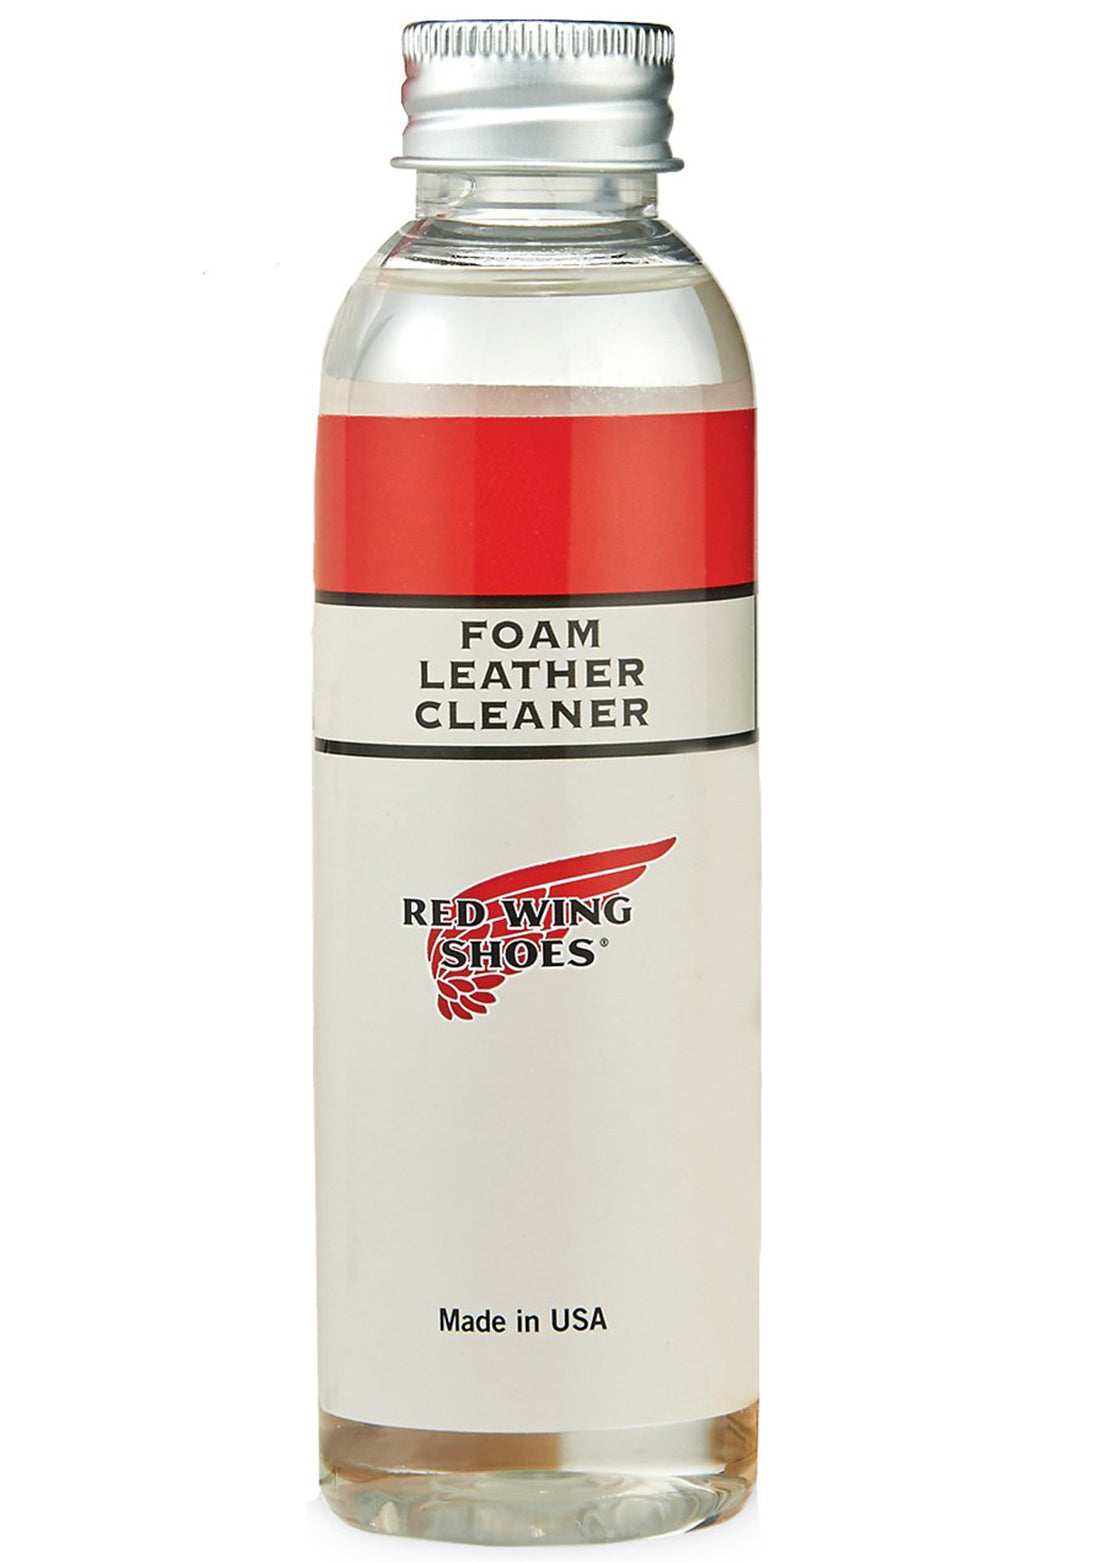 Redwing Foam Leather Cleaner No Color